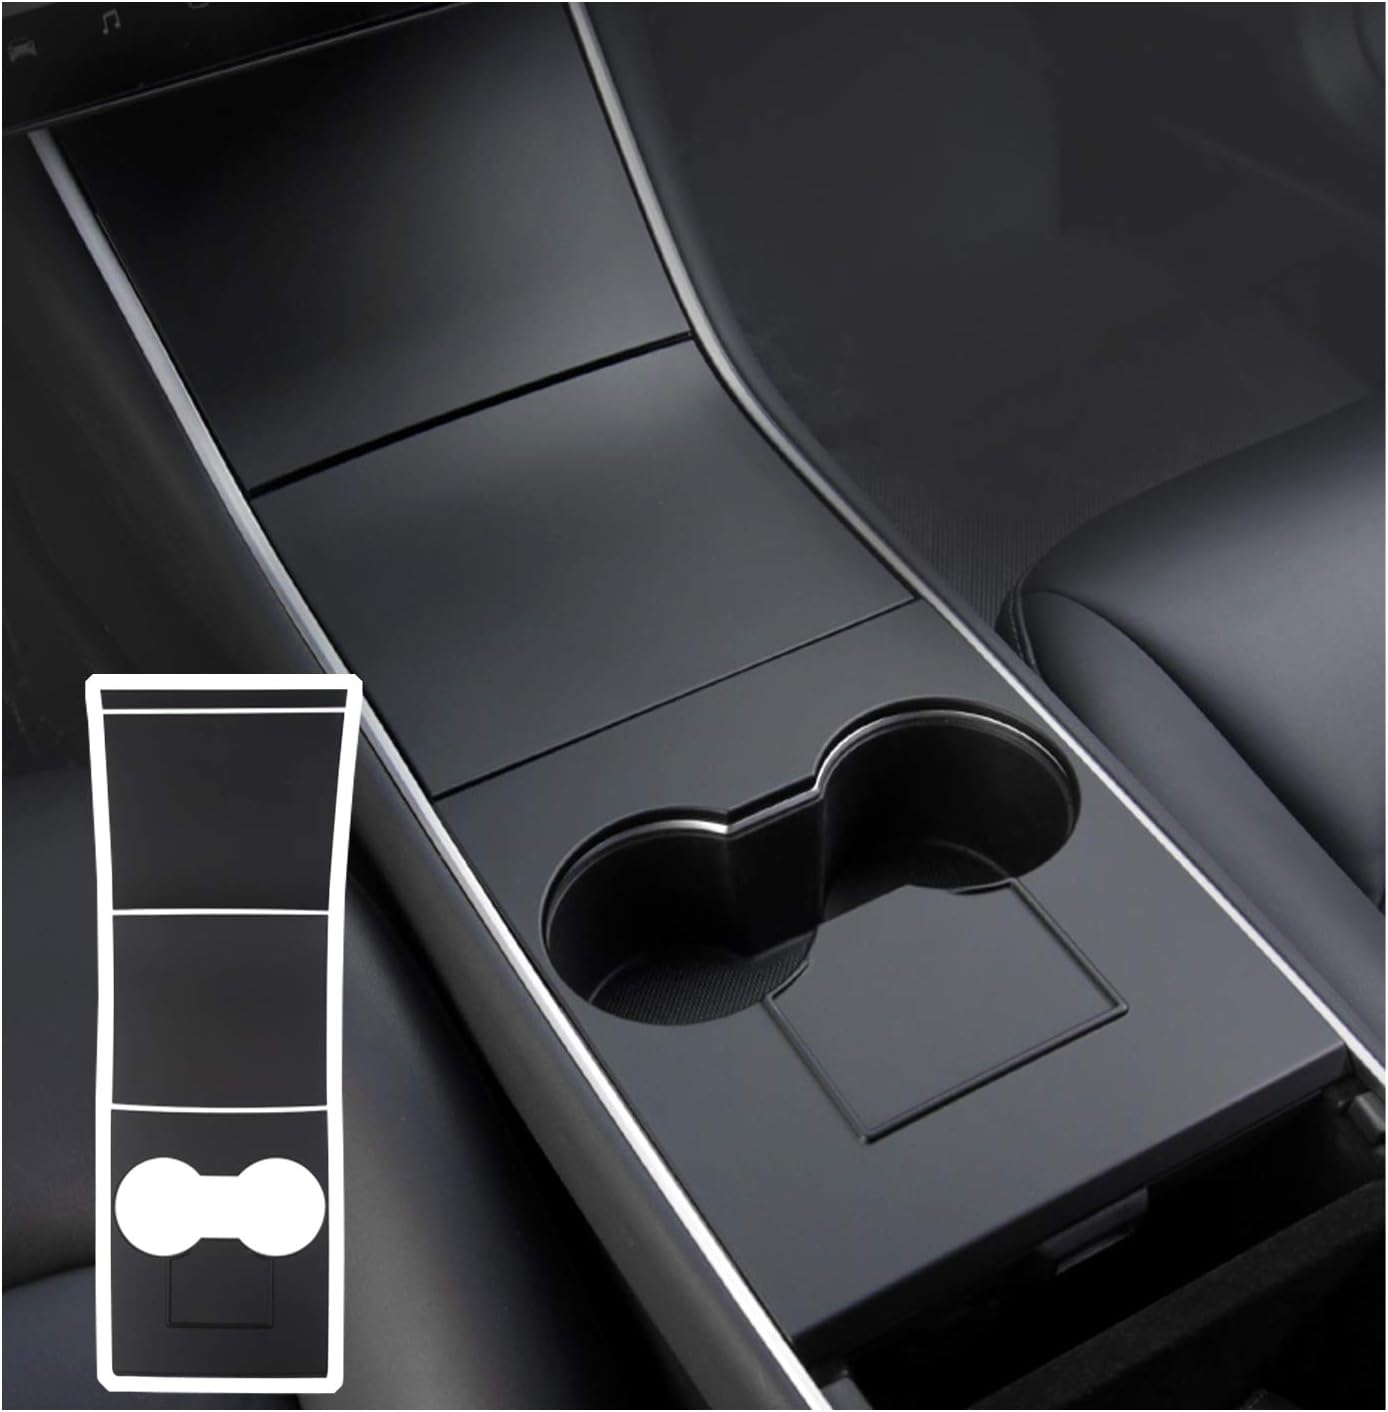 Center Console Cover For Model 3/Y - Tesery Official Store